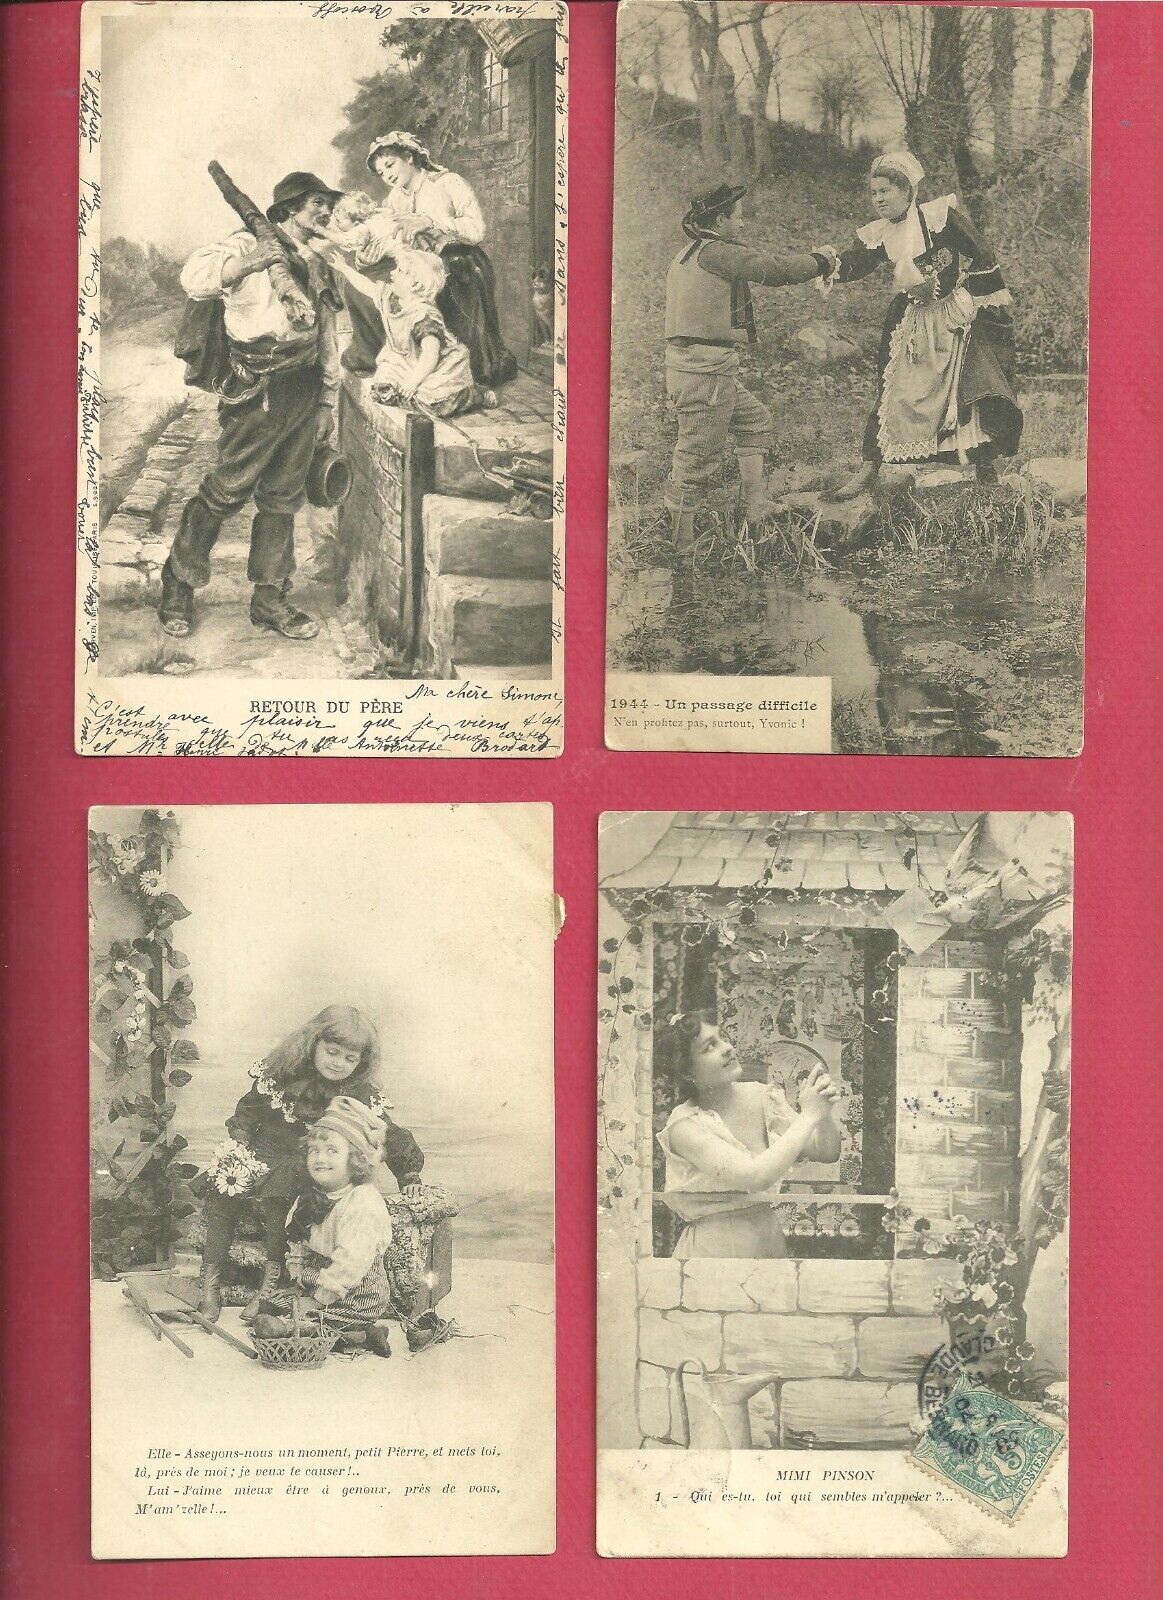 CP 47: 20 cards depicting life scenes in France